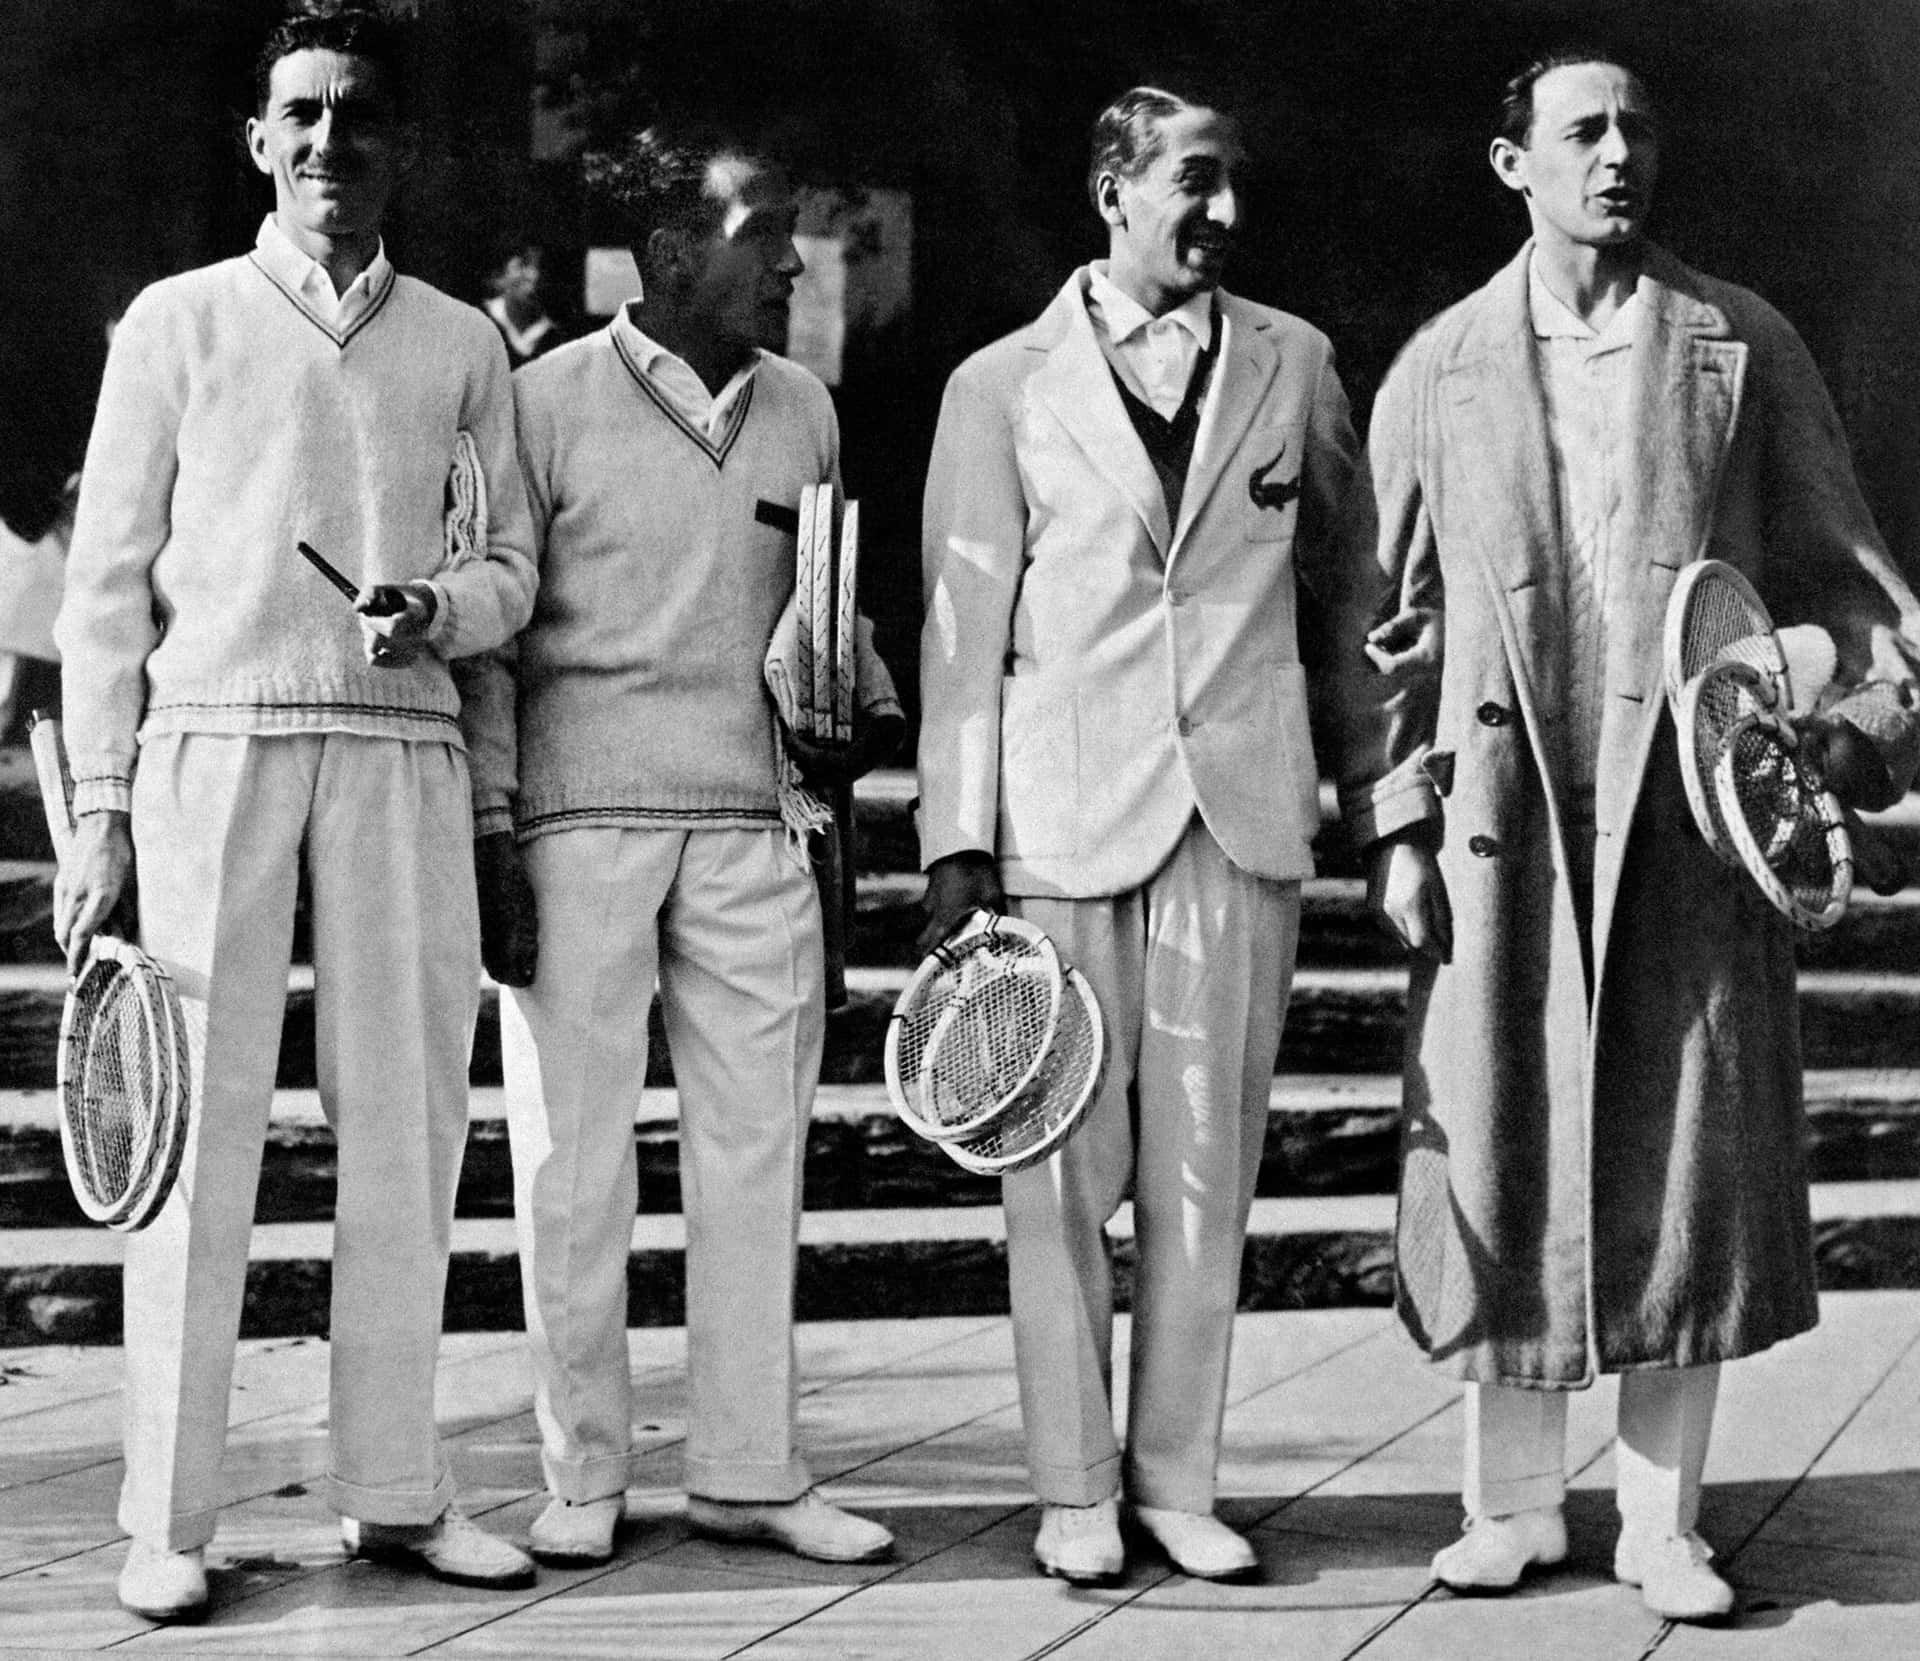 René Lacoste with Jean Borotra at a Tennis Match Wallpaper